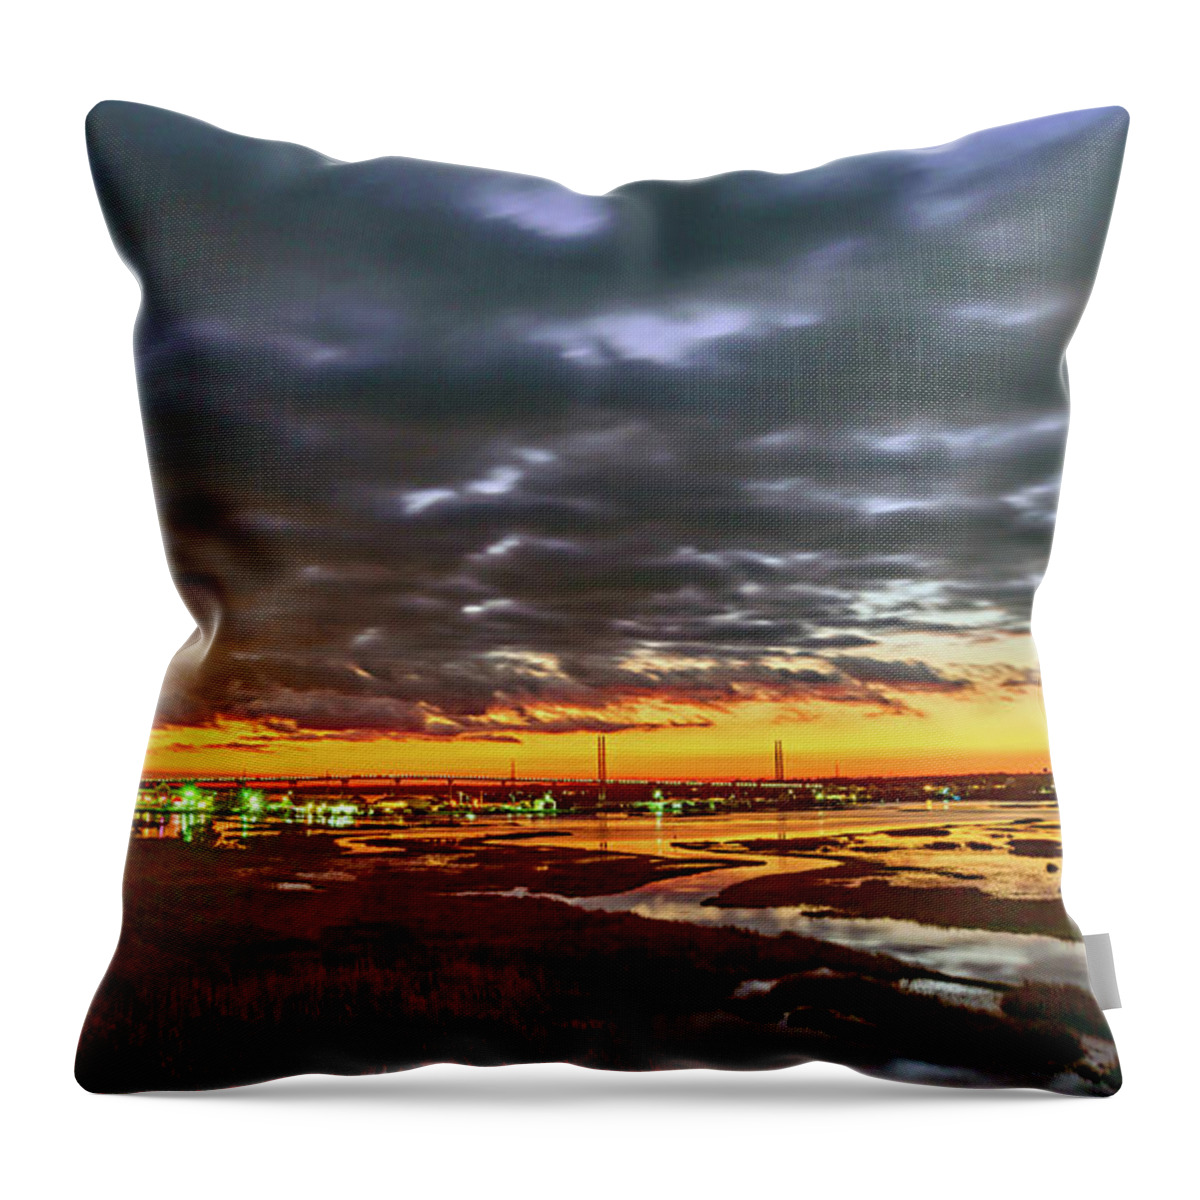 Sunset Throw Pillow featuring the photograph Bridge Clouds by DJA Images